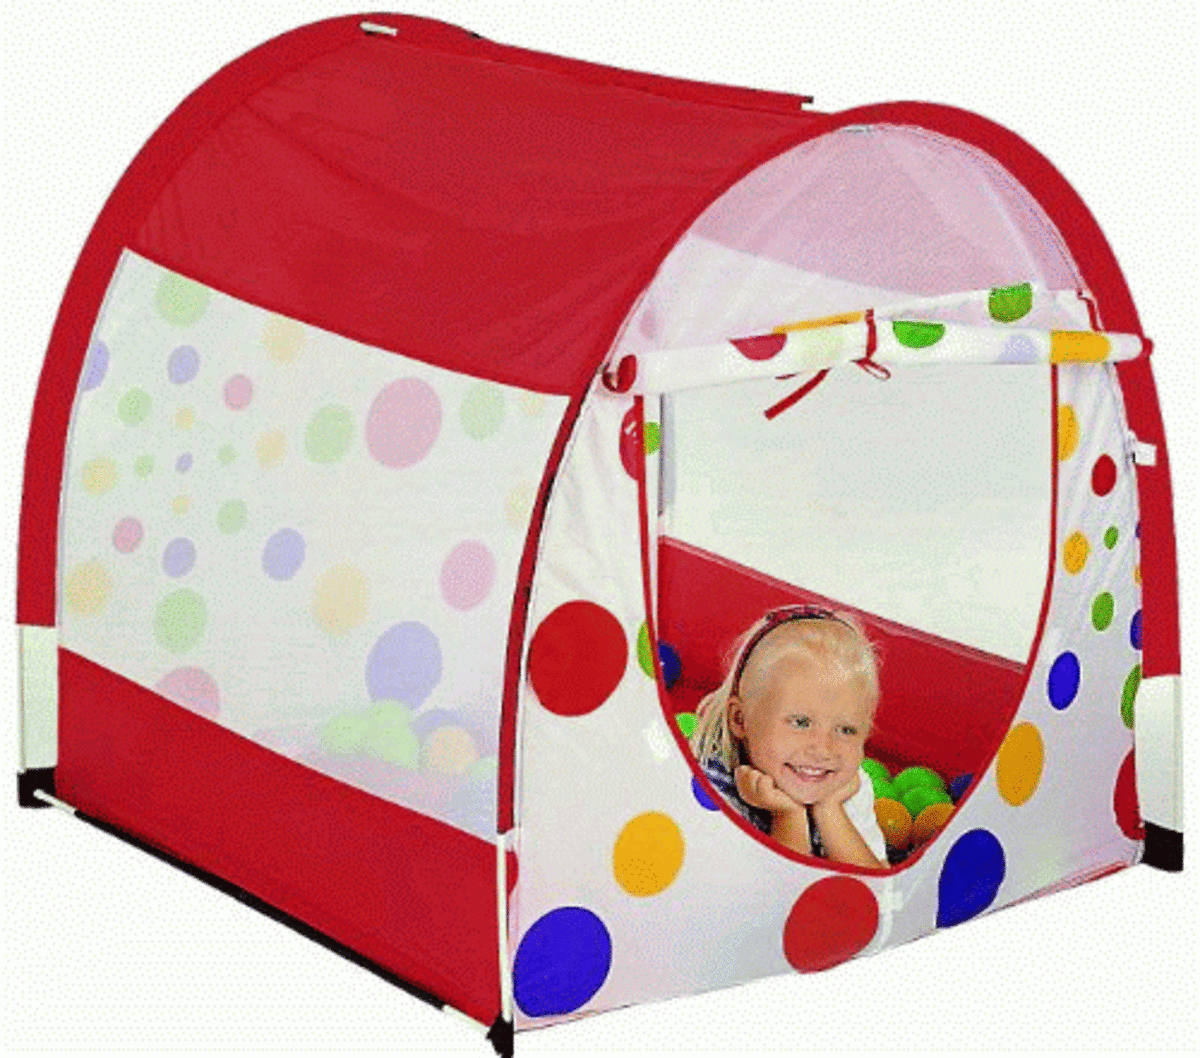 Play tents with balls also act as a quite area where your child can go to wind down.